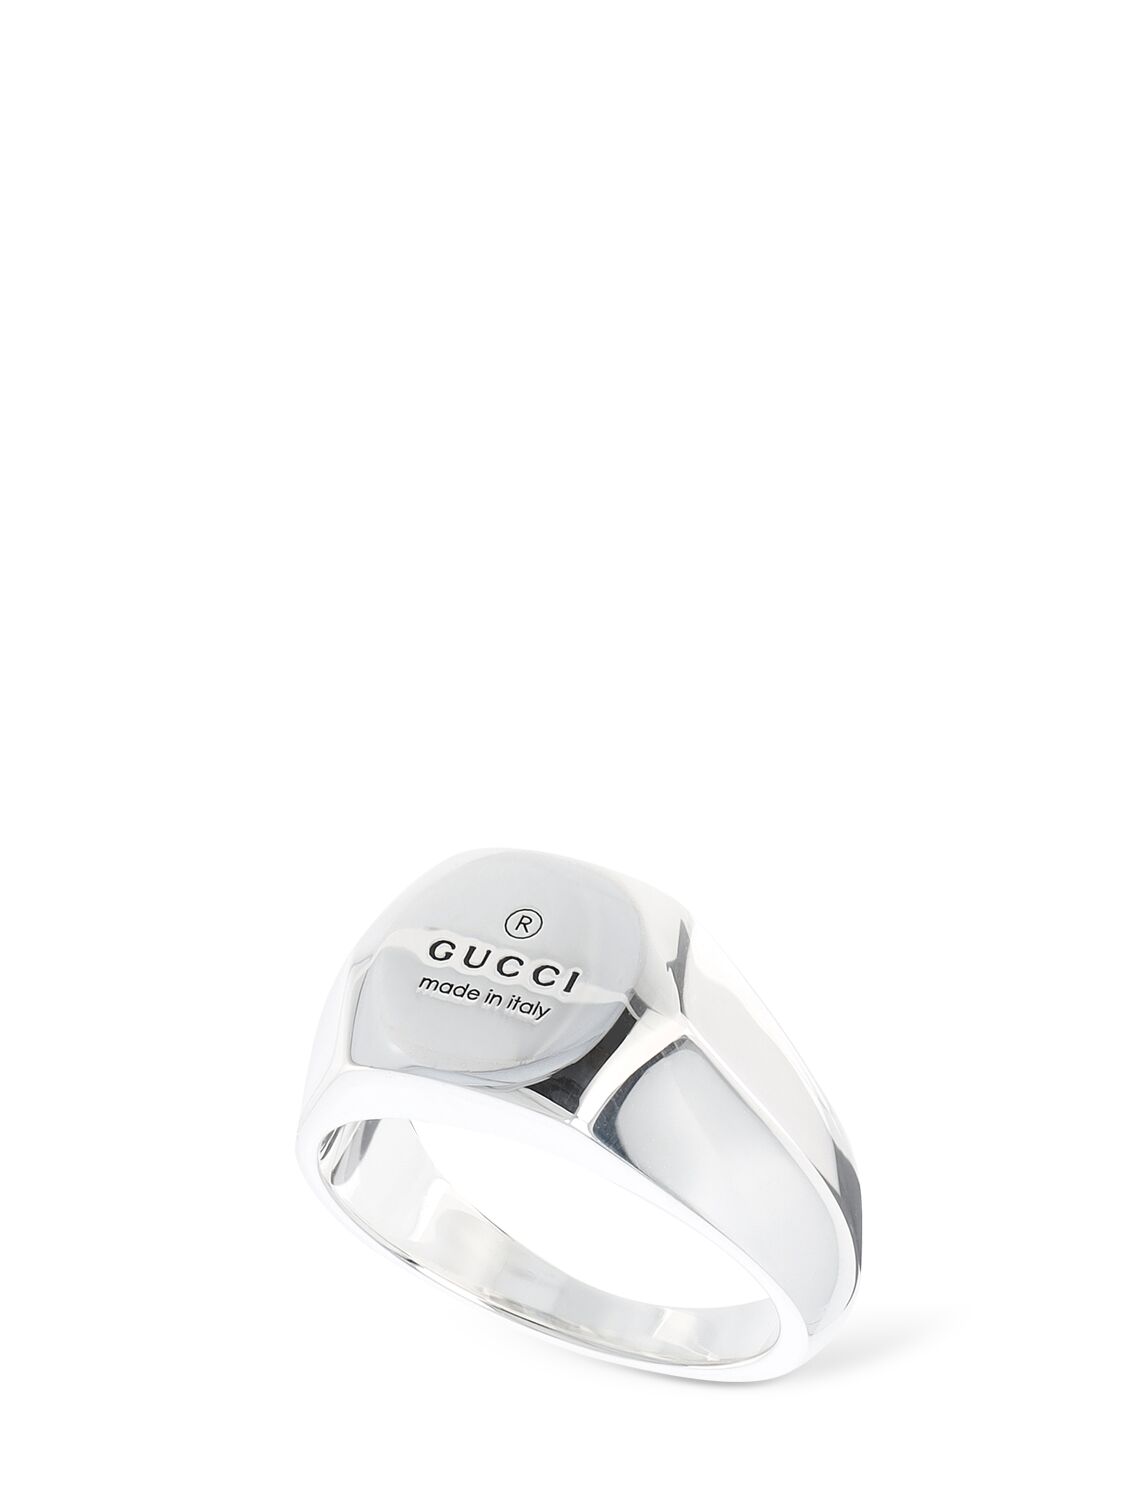 Gucci Trademark Sterling Silver Ring